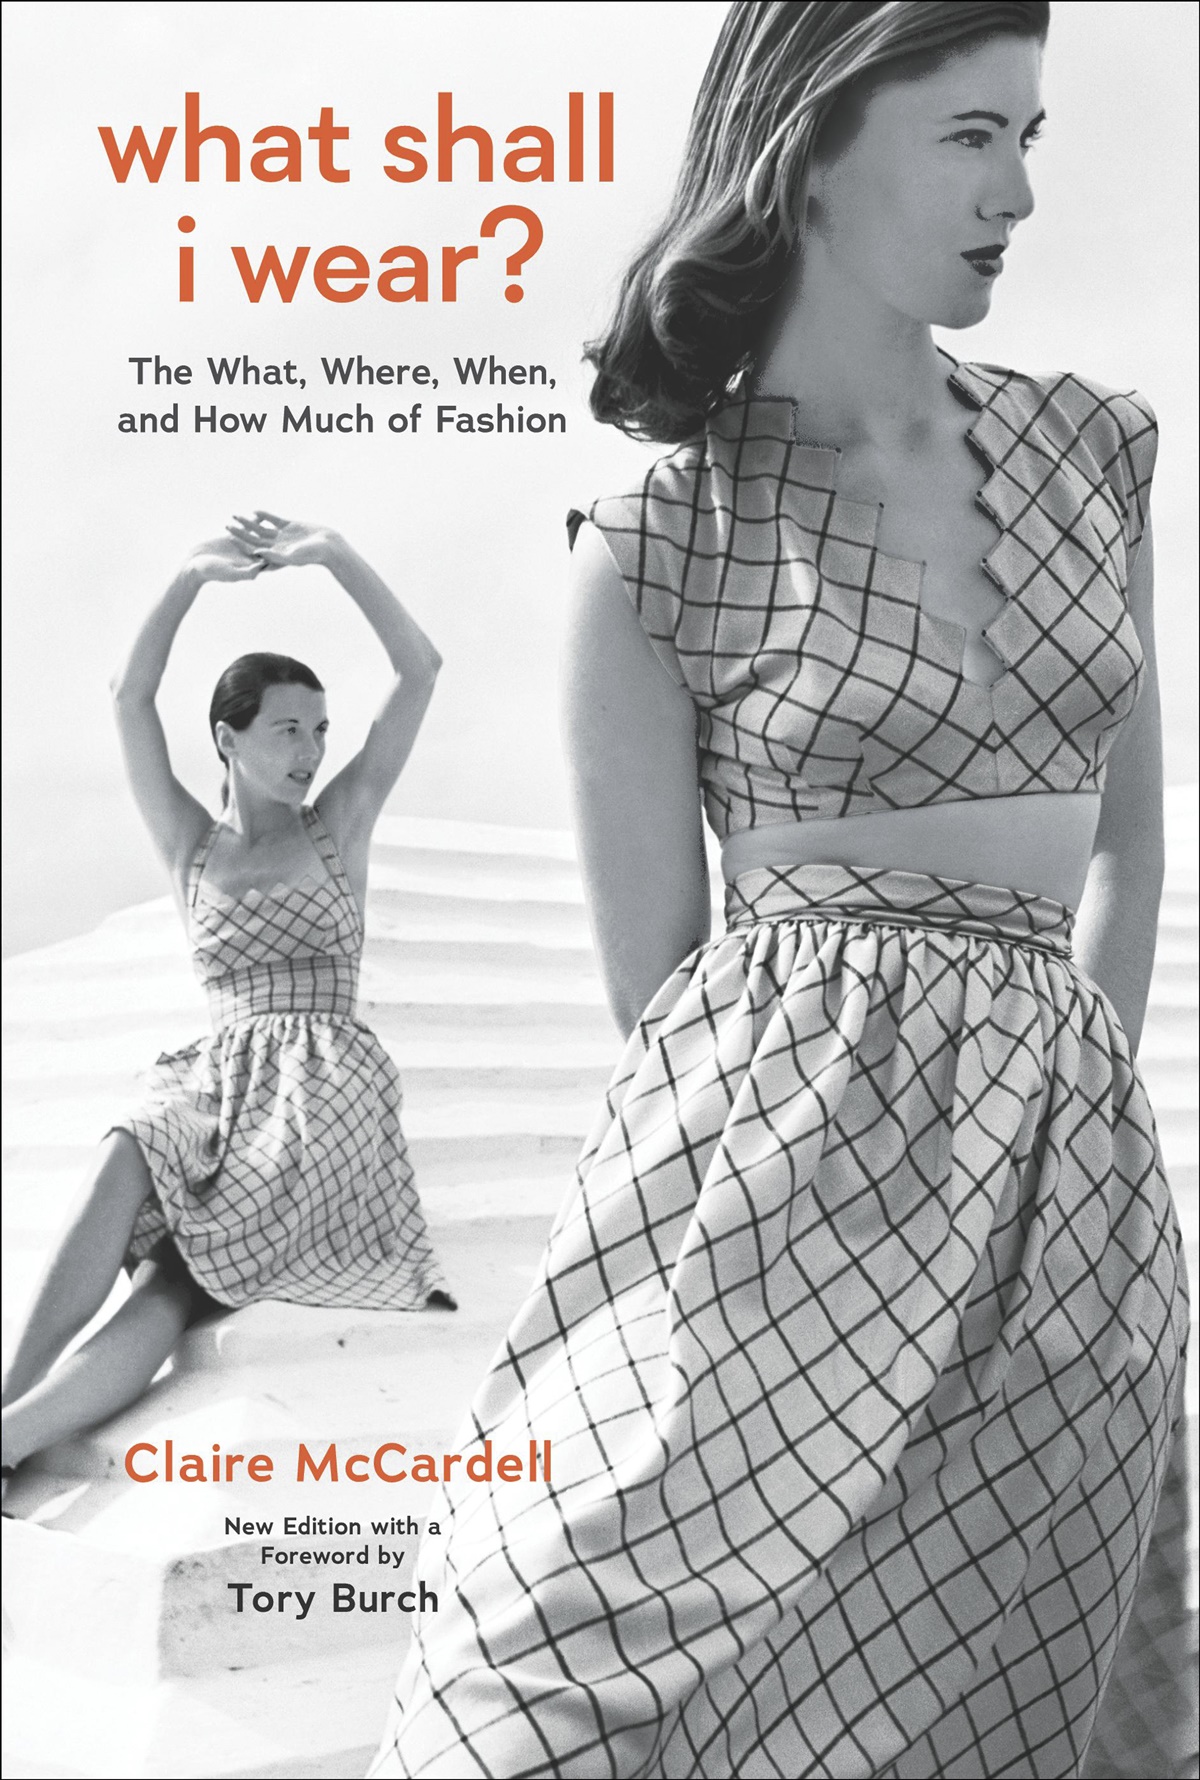 Books by Claire McCardell, fashion